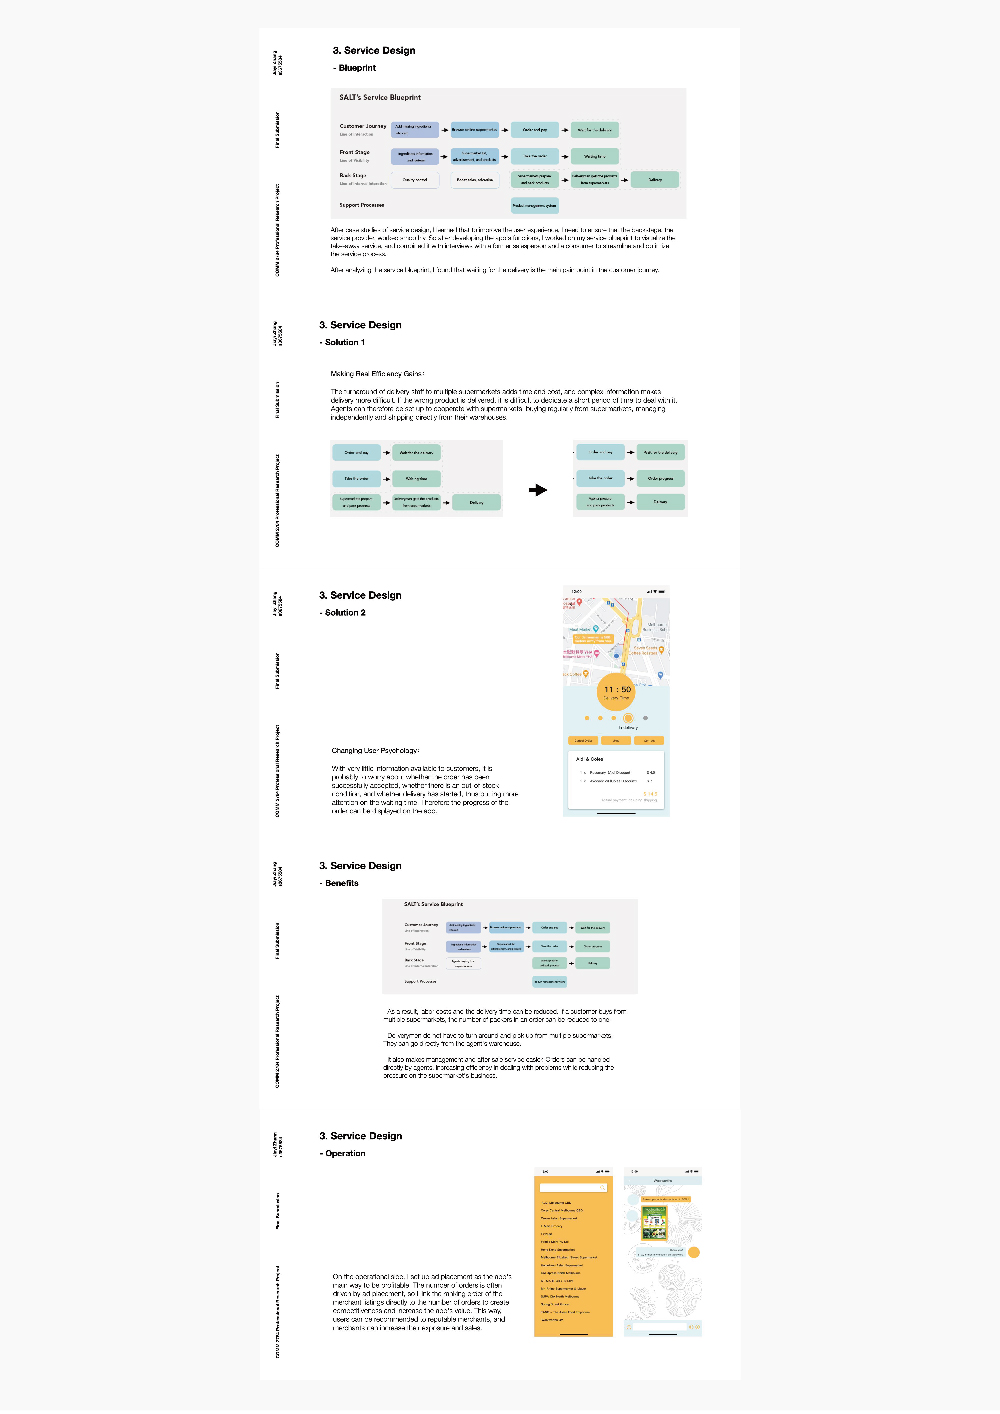 In the second phase I worked on my service blueprint to visualize the service and combine the perspectives of a former seller and a consumer to optimize the service process from their different perspectives.